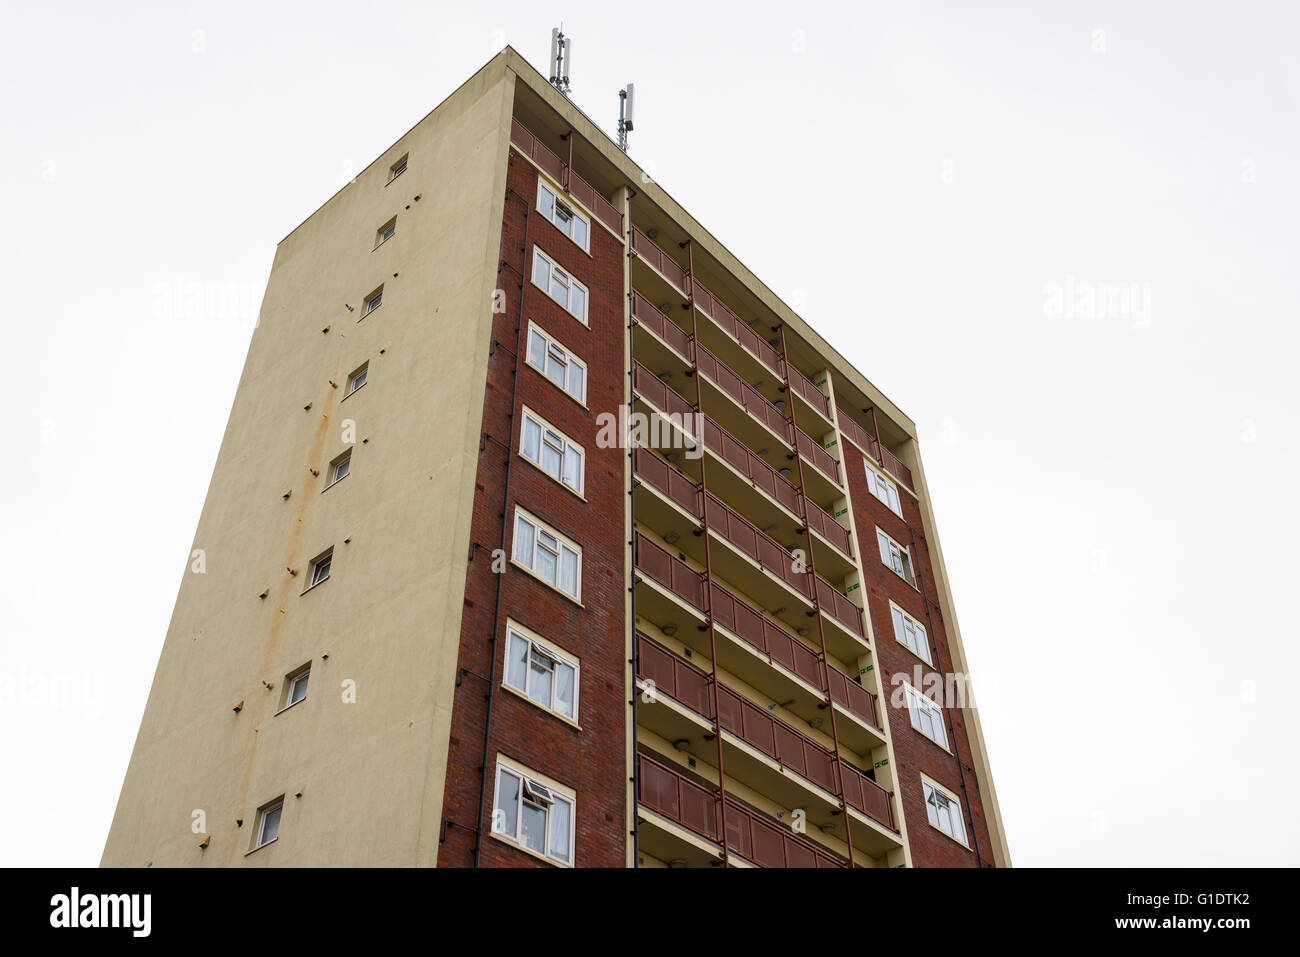 High rise council flat. A council house is a form of public or social housing built by local municipalities in the UK Stock Photo